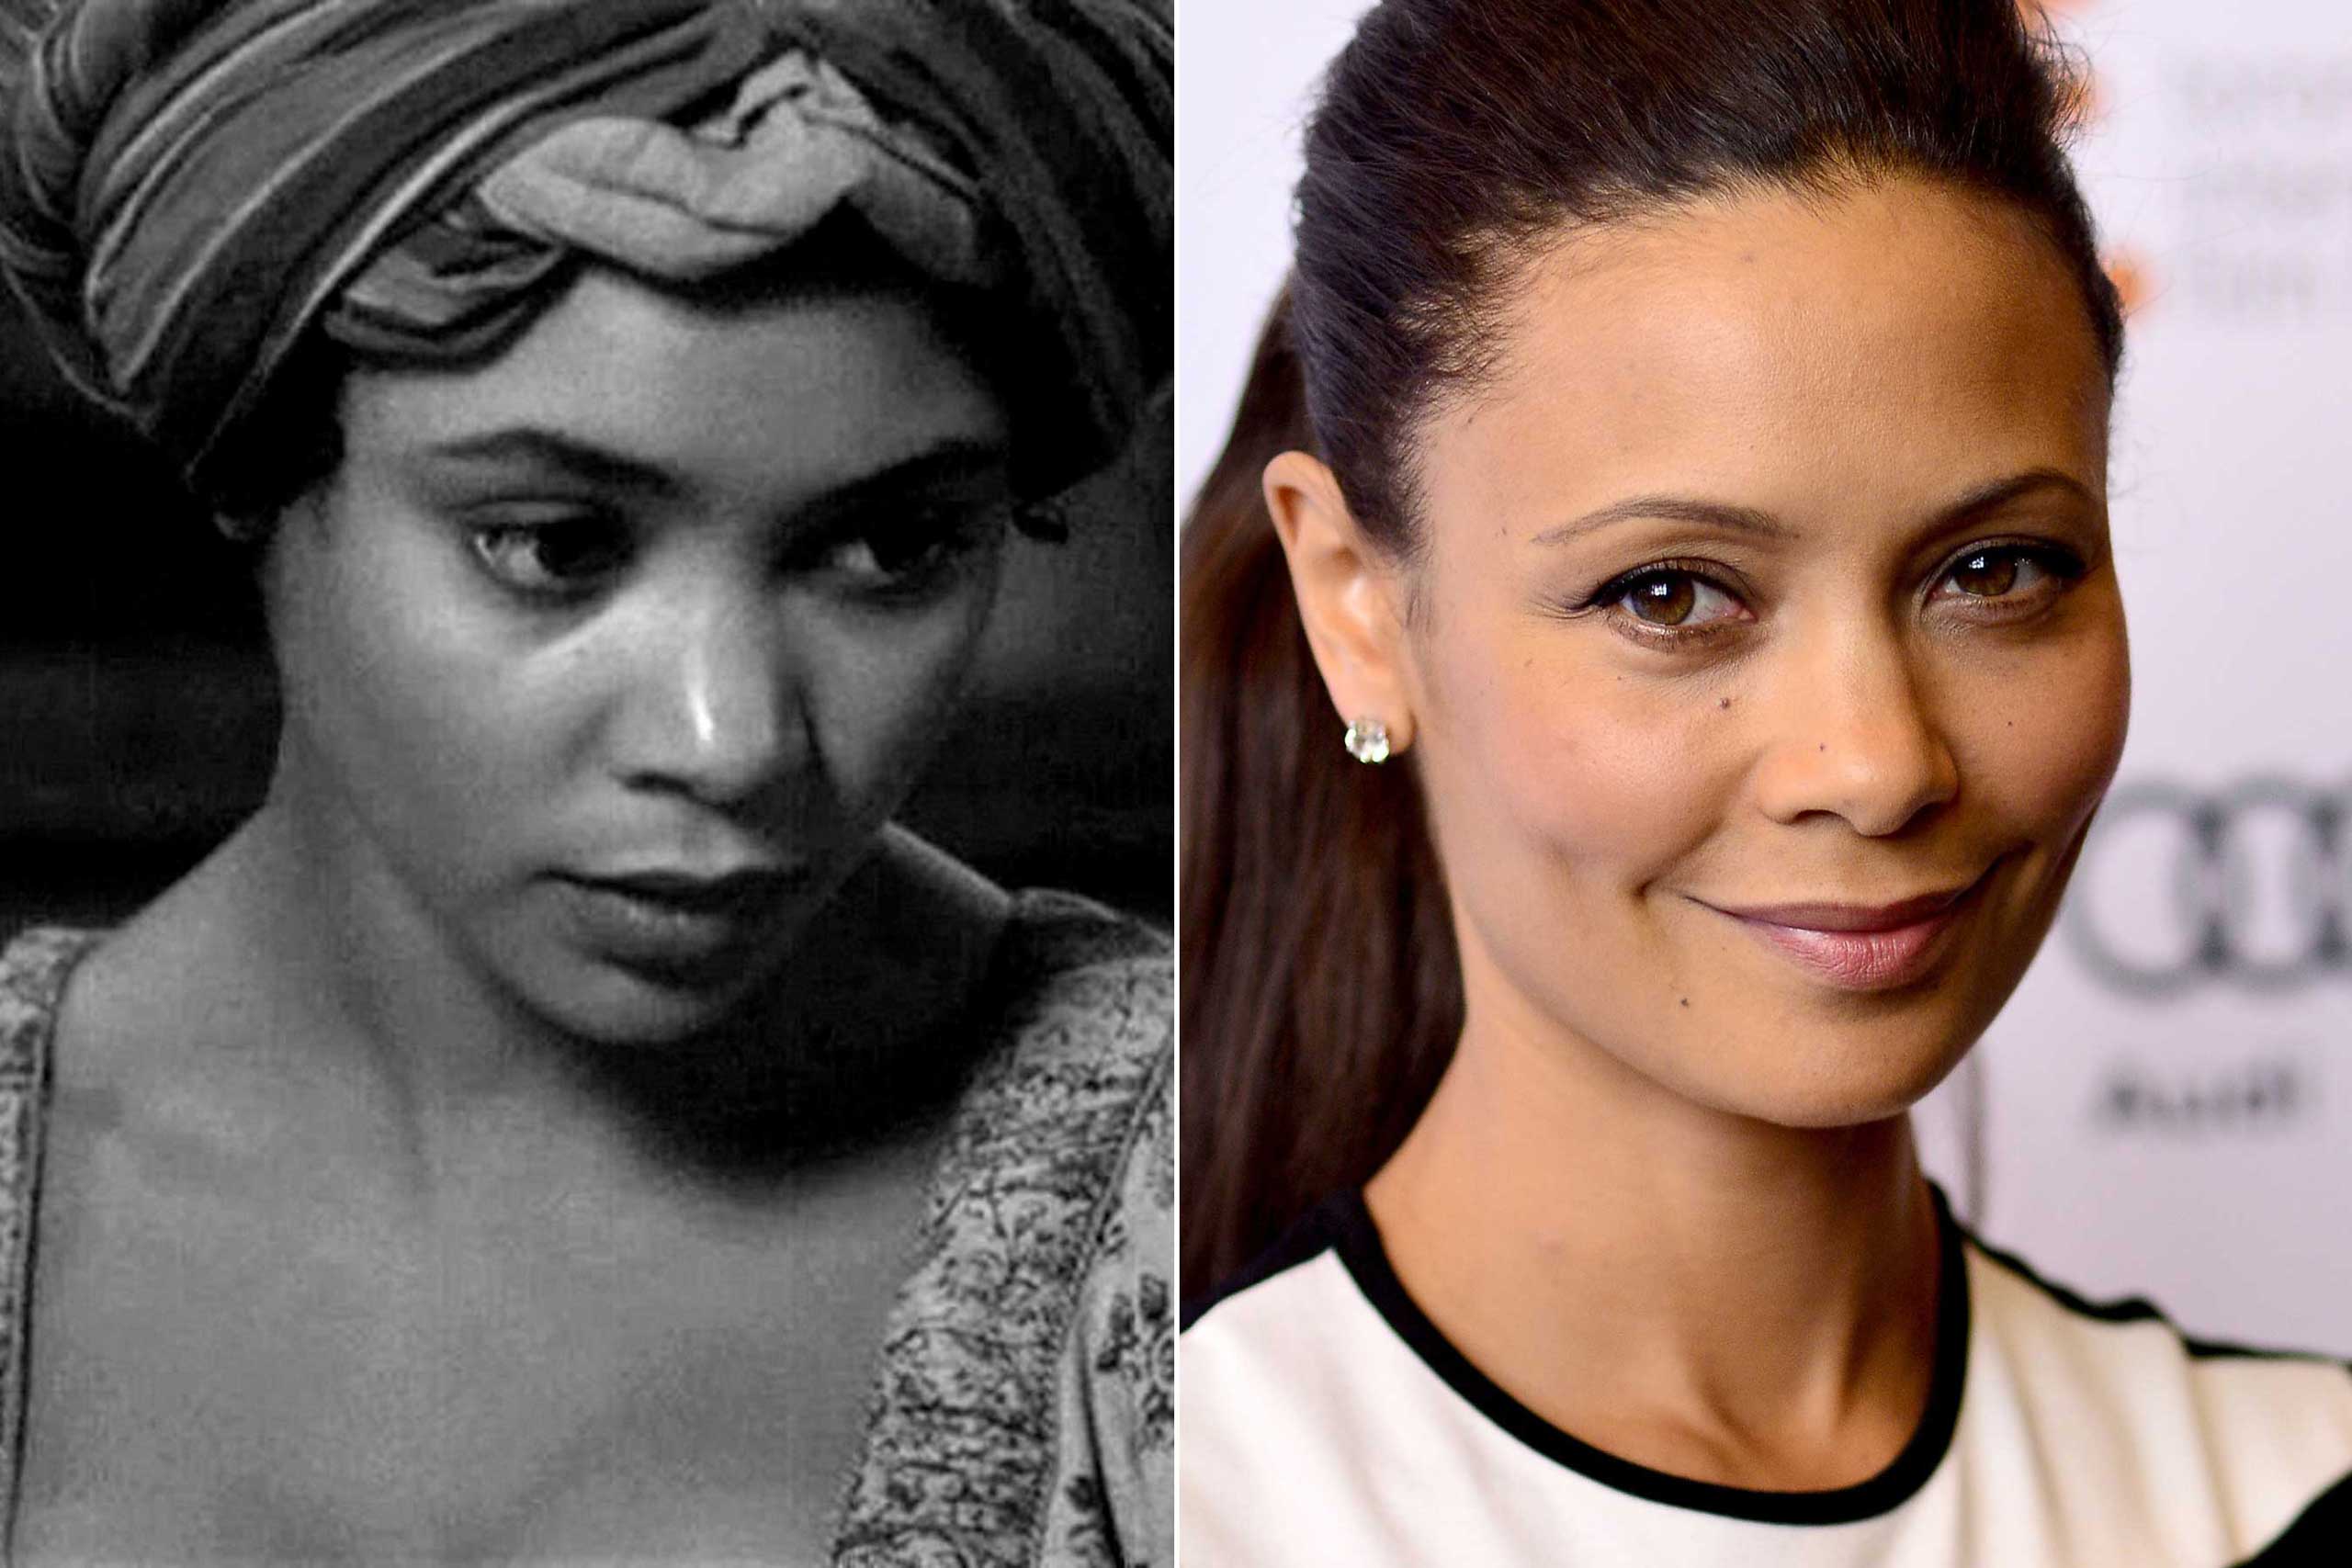 Thandie Newton: Vampire victim Yvette was one of Thandie Newton’s first roles, but she capitalized on it, going on to play Sally Hemings the next year in Jefferson in Paris and then a lead role in Beloved. By the 2000s, Newton was involved in bigger-budget projects, including Mission: Impossible II and The Chronicles of Riddick; she was also a star of Oscar best picture winner Crash. More recently, Newton’s been announced as part of the cast of HBO’s sci-fi adaptation Westworld.